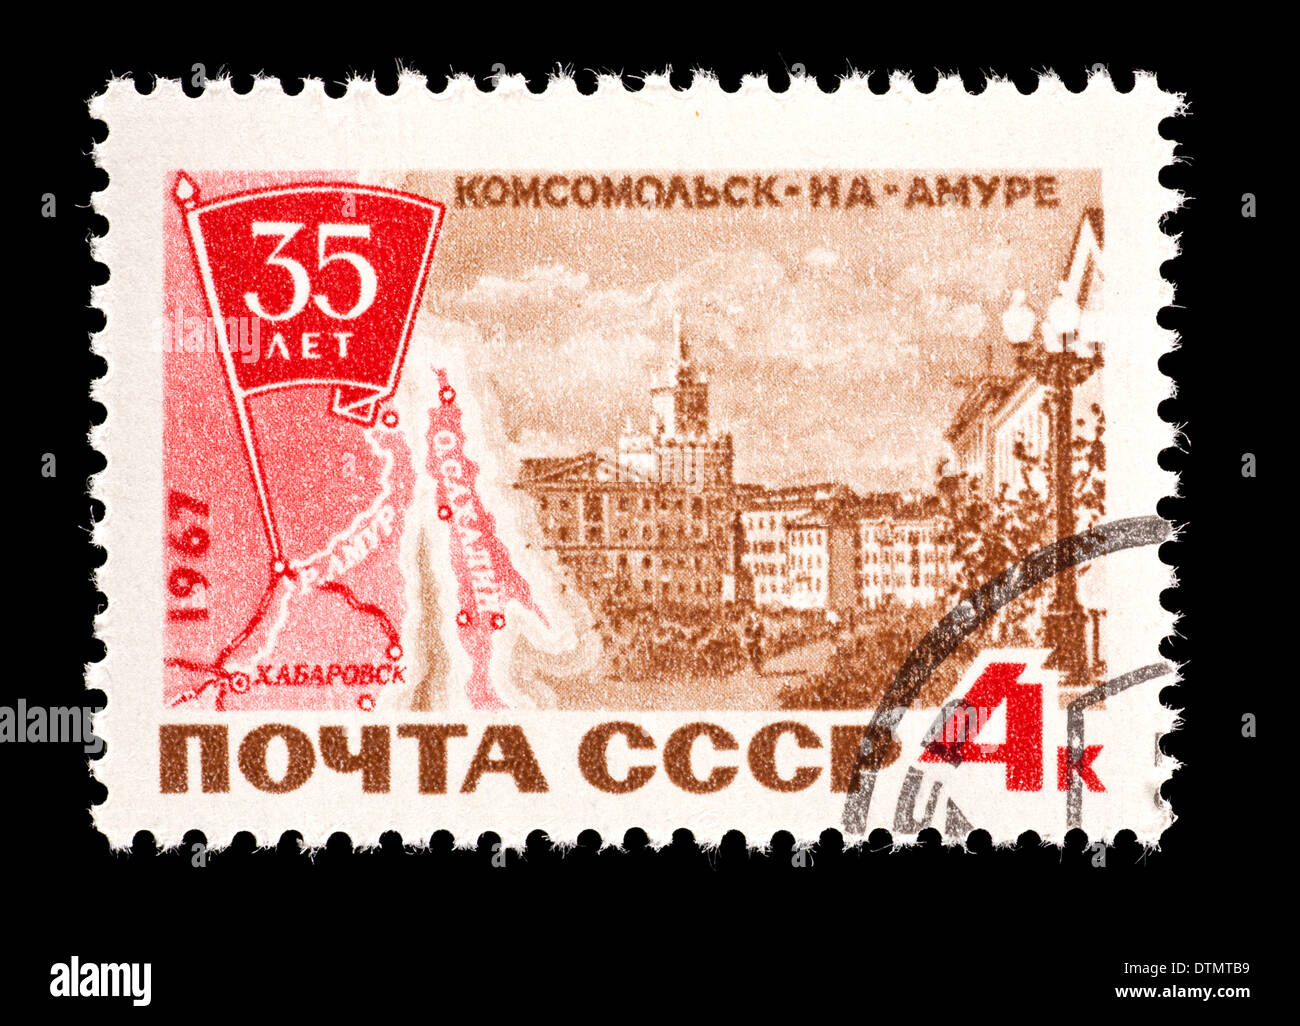 Postage stamp from the Soviet Union (USSR) depicting Komsomolsk-on-Amur, Soviet Youth Town. Stock Photo